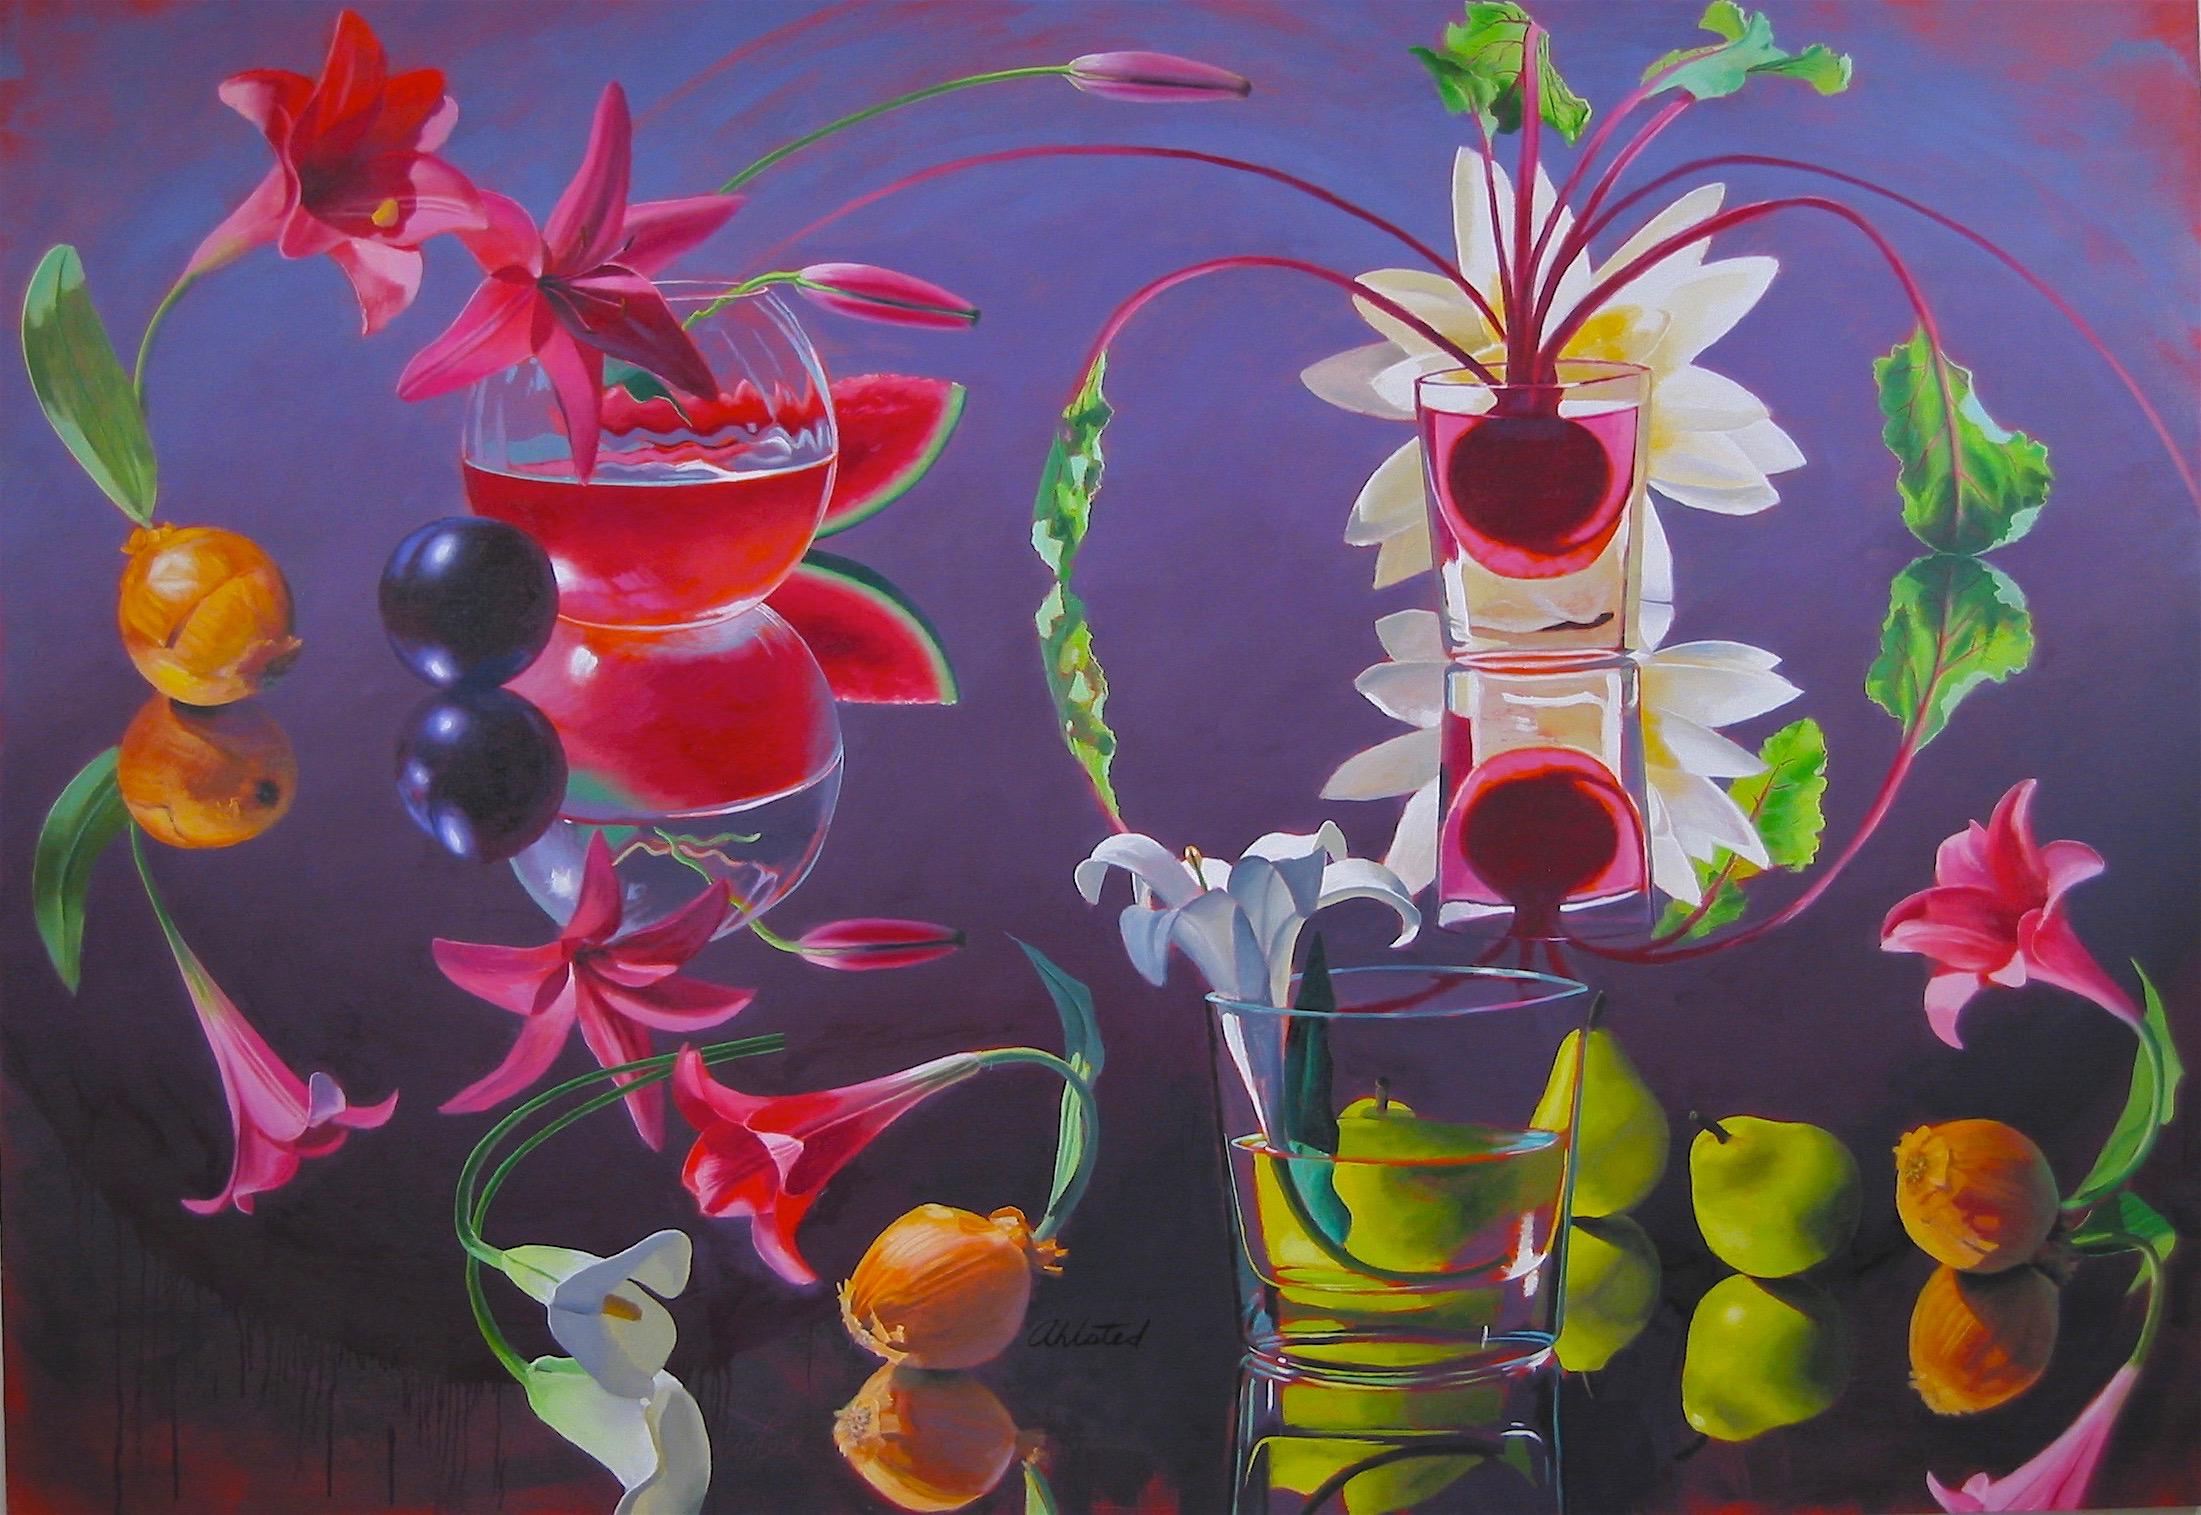 David Ahlsted Still-Life Painting - "Purple Madder"  Contemporary Flowers Fruit red purple photorealist  $15, 500